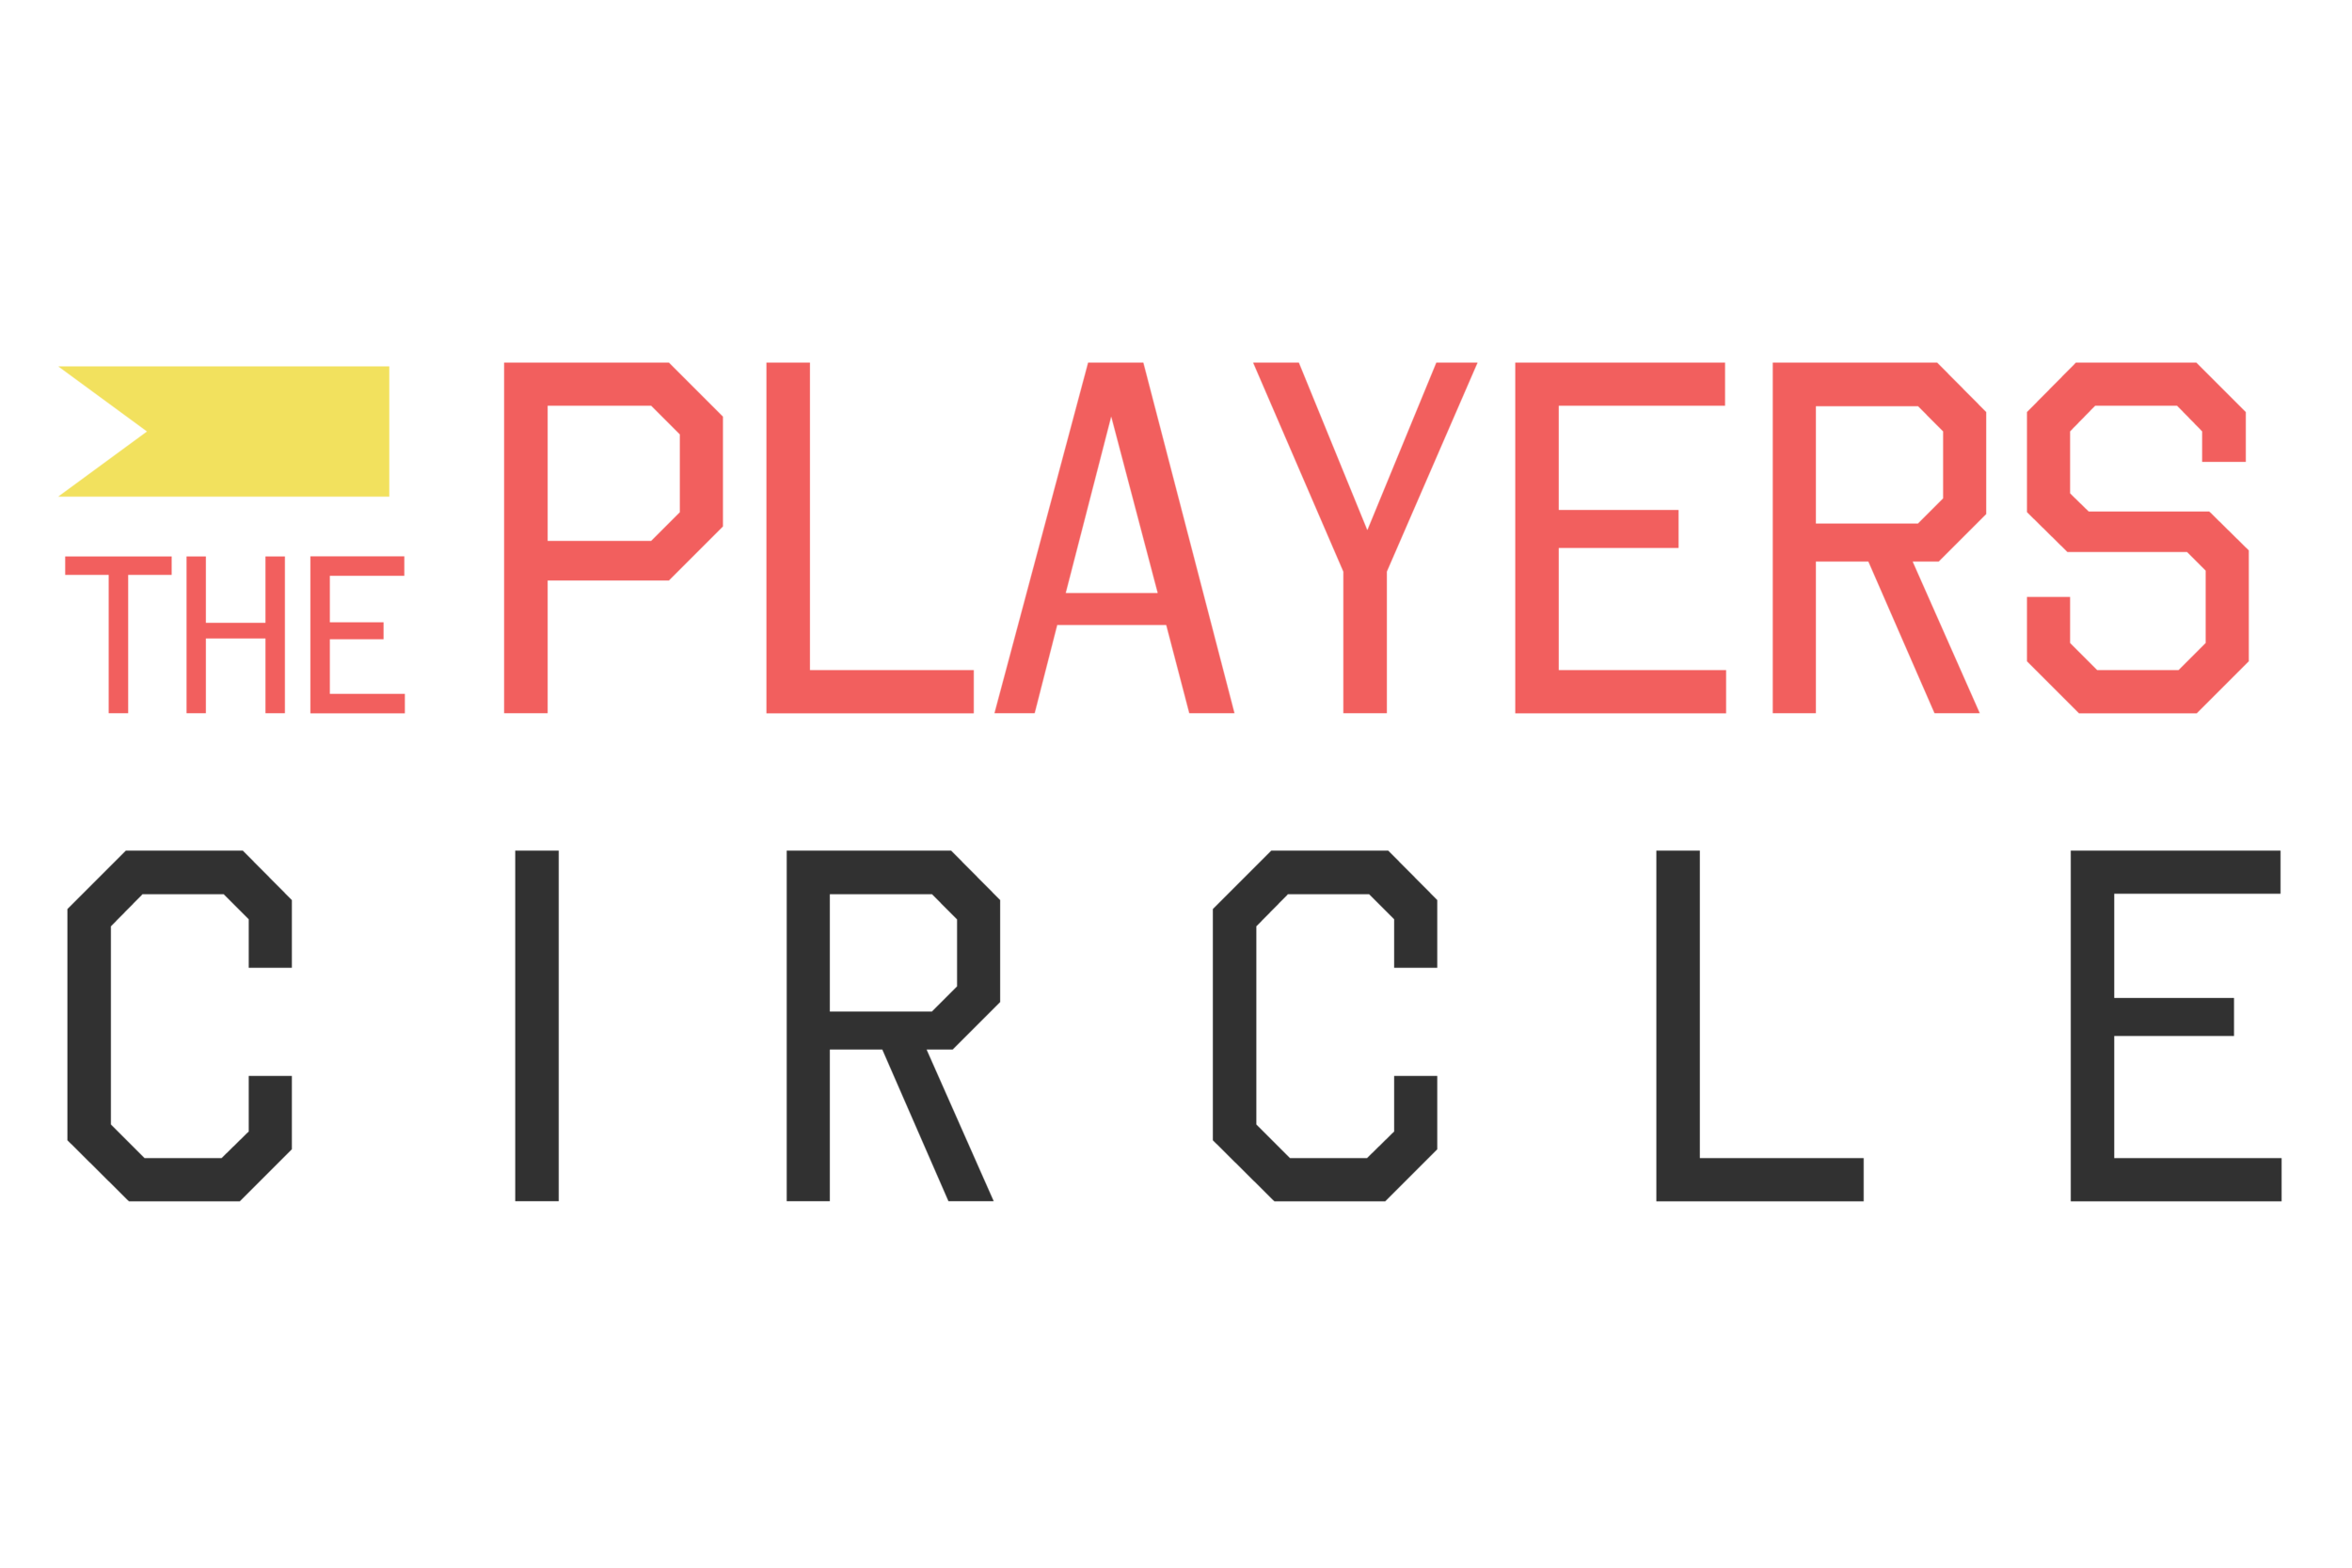 The Players Circle